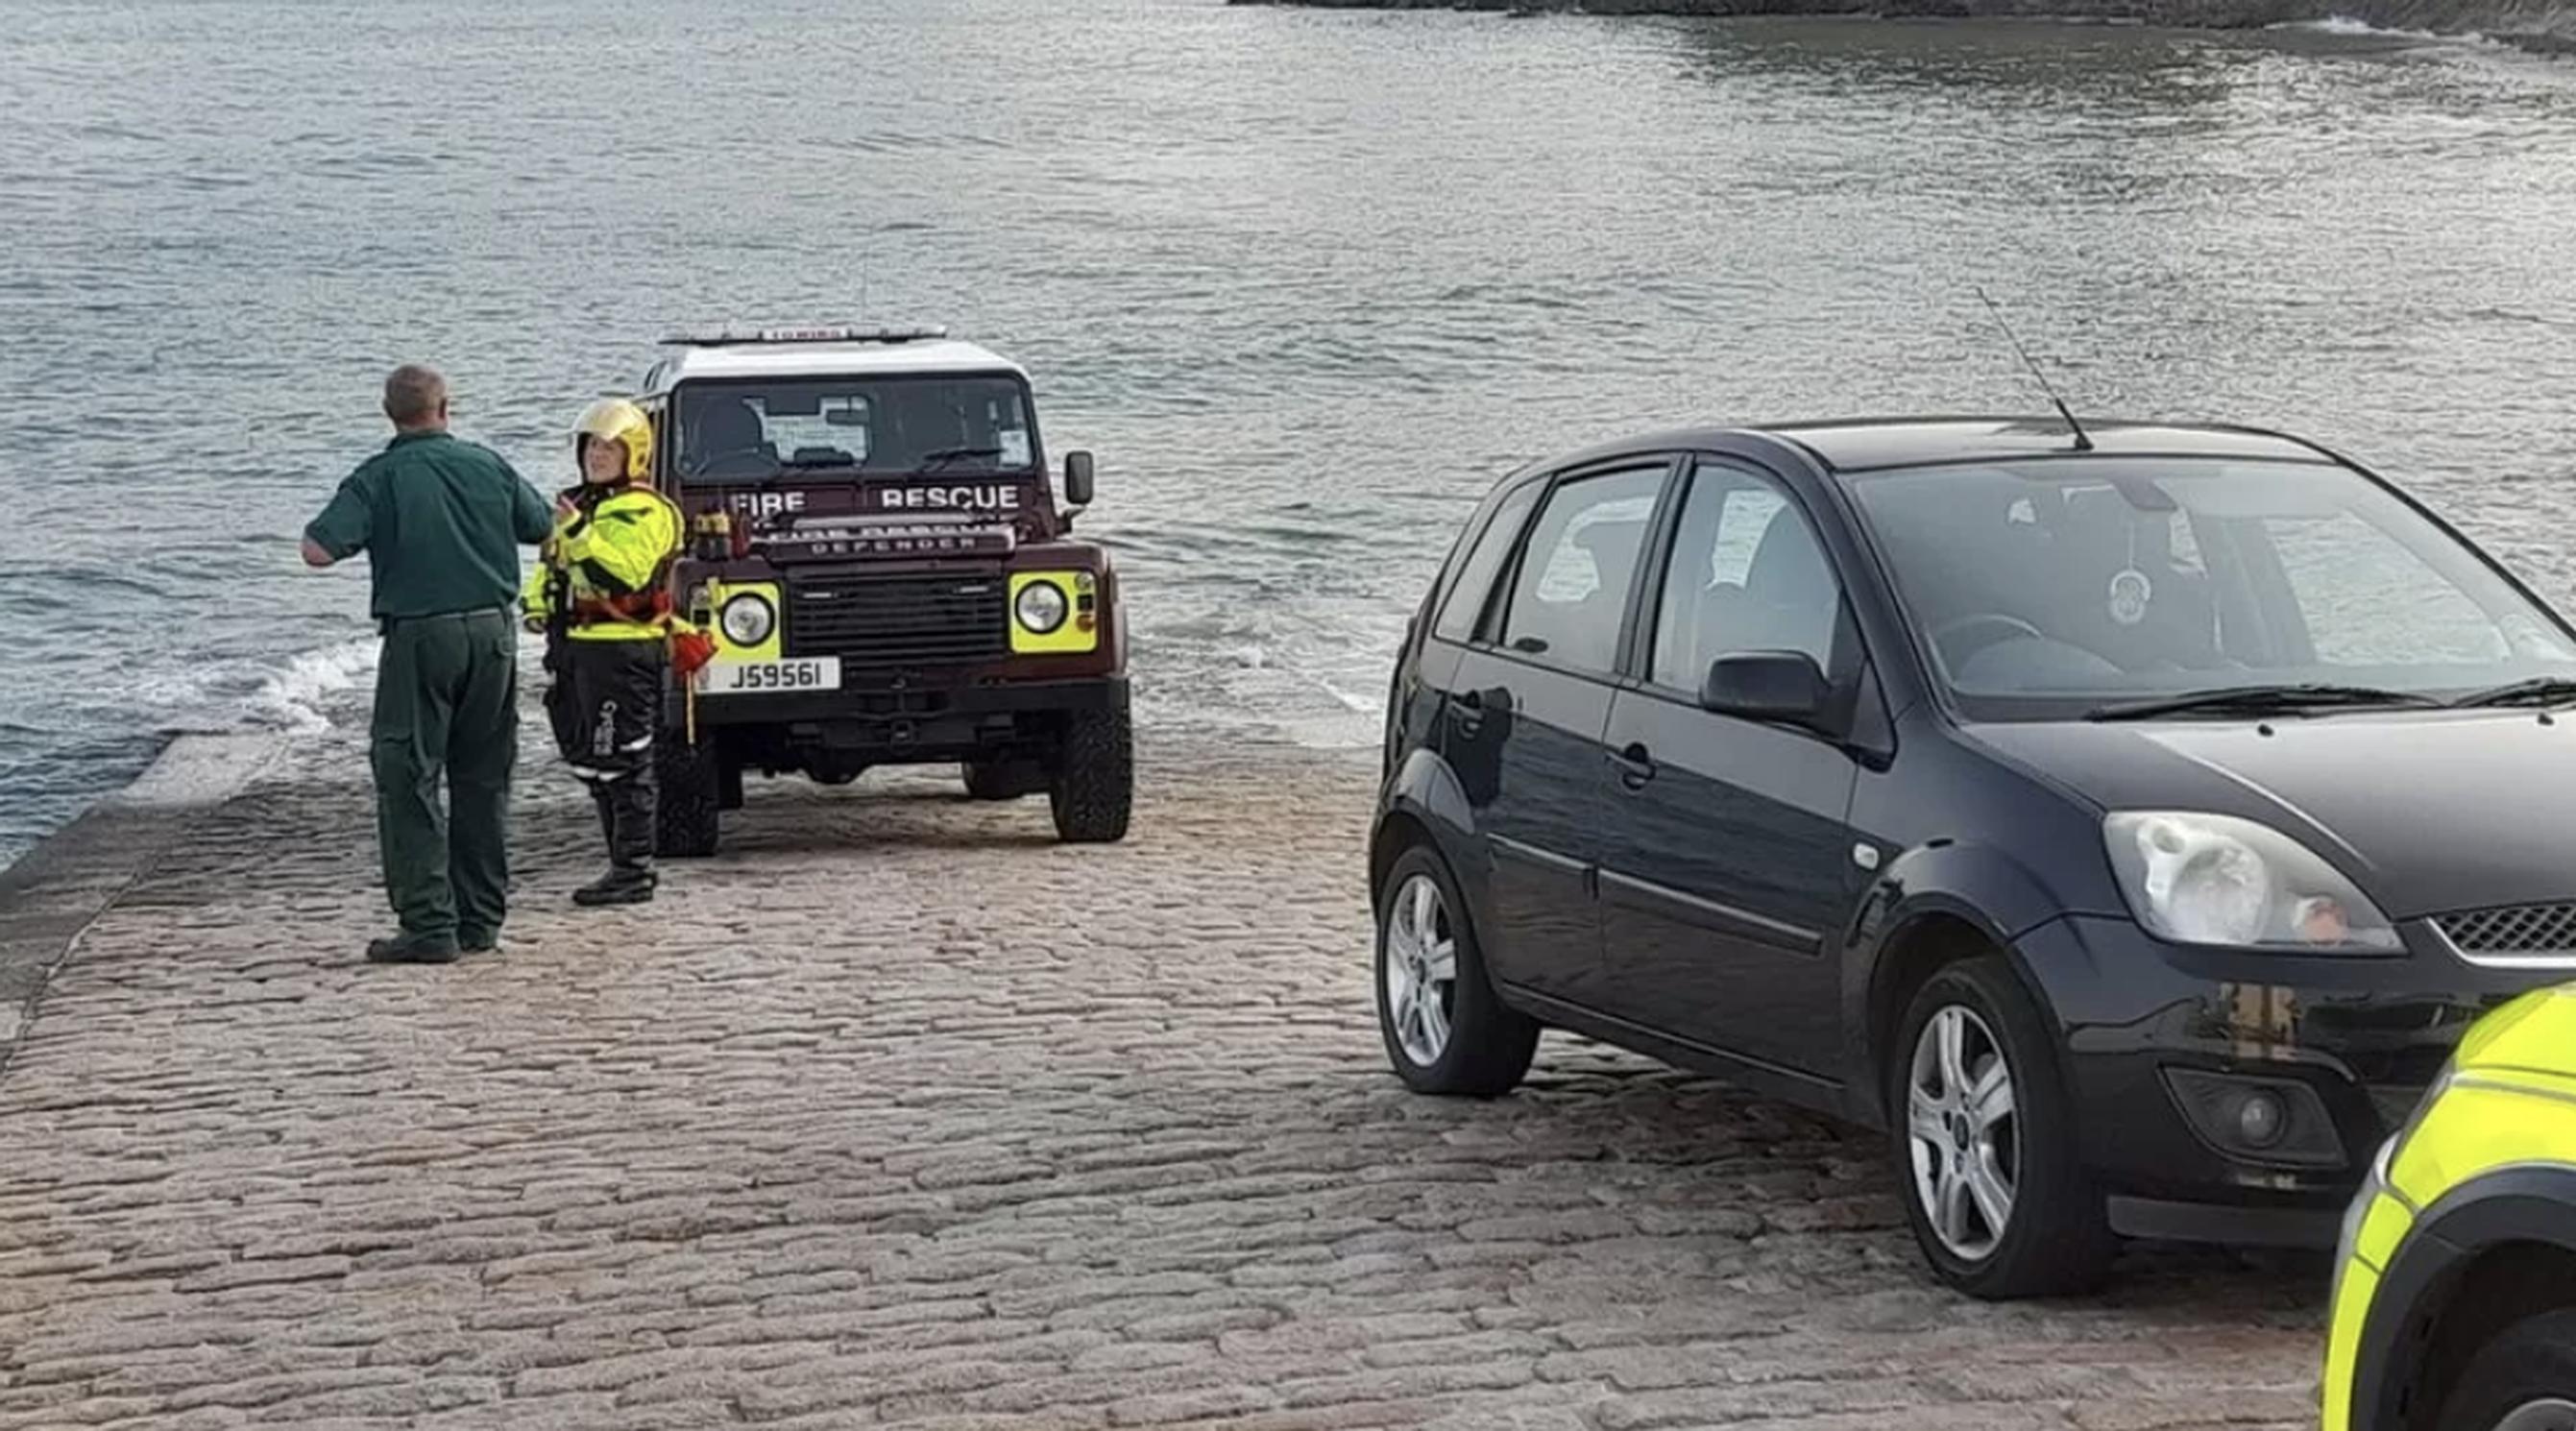 Jersey Fire and Rescue wants locals to keep slipways clear